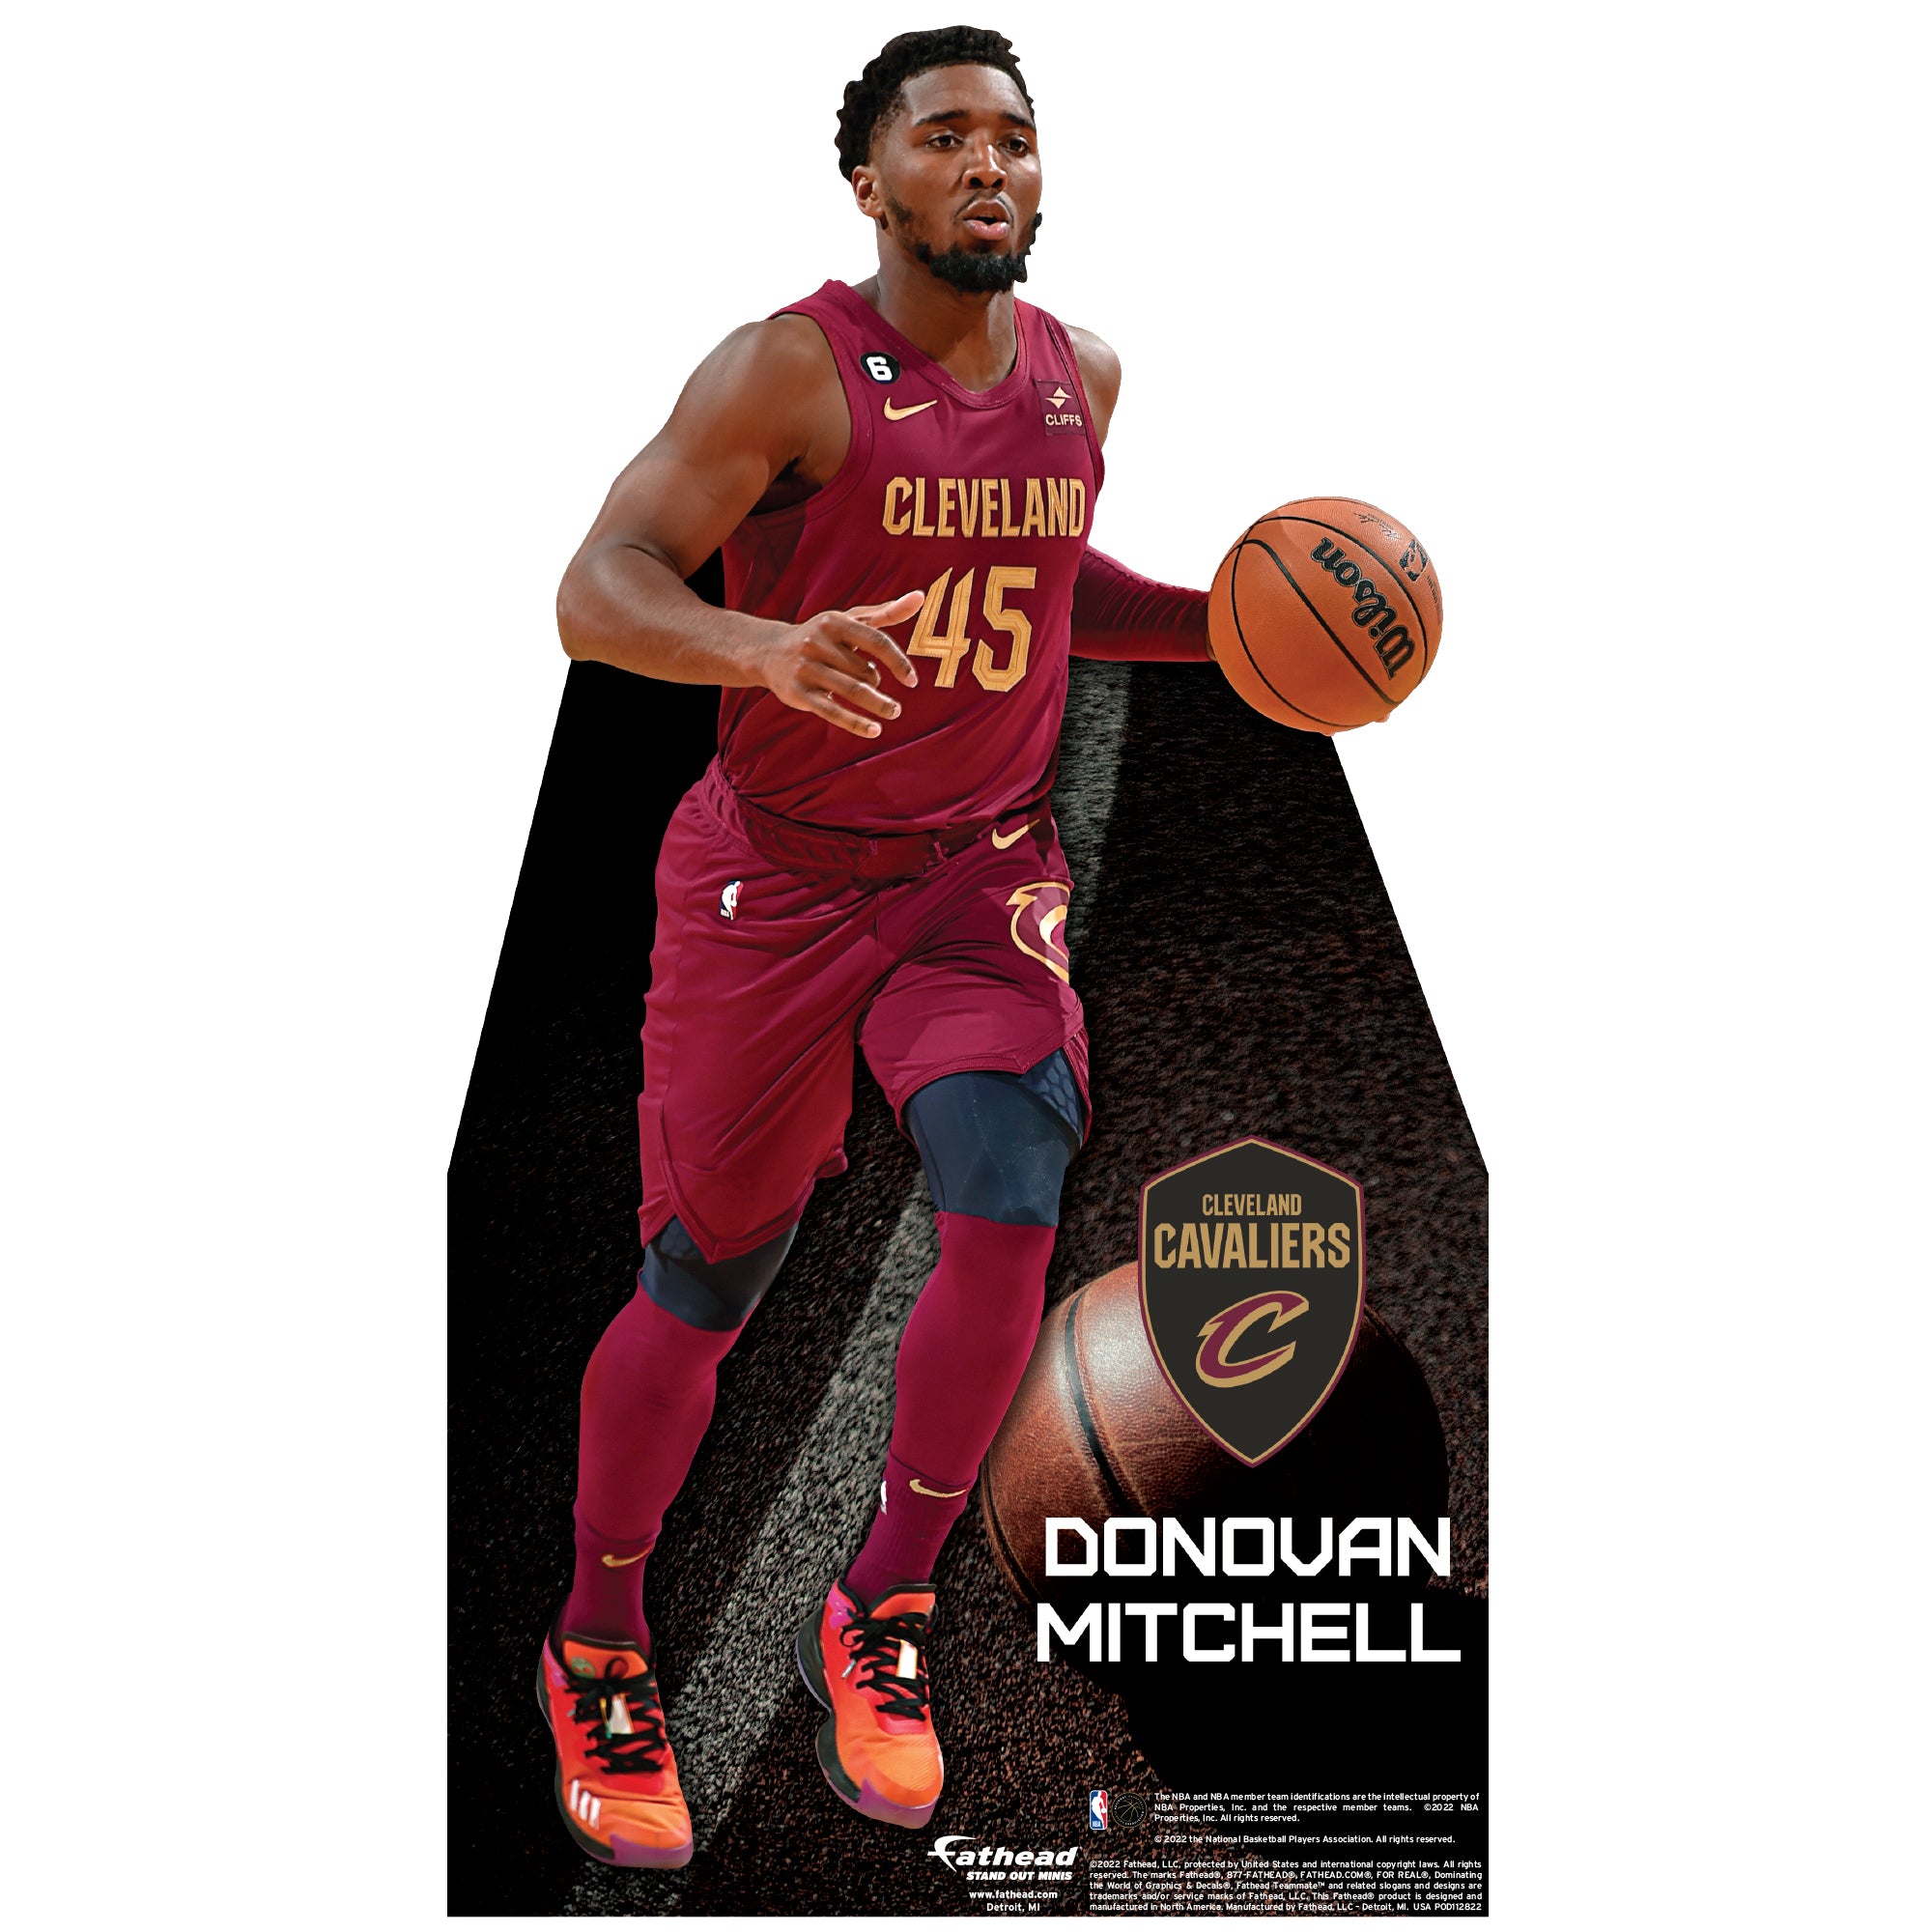 Cavs Nation - Concept jersey design for the Cleveland Cavaliers